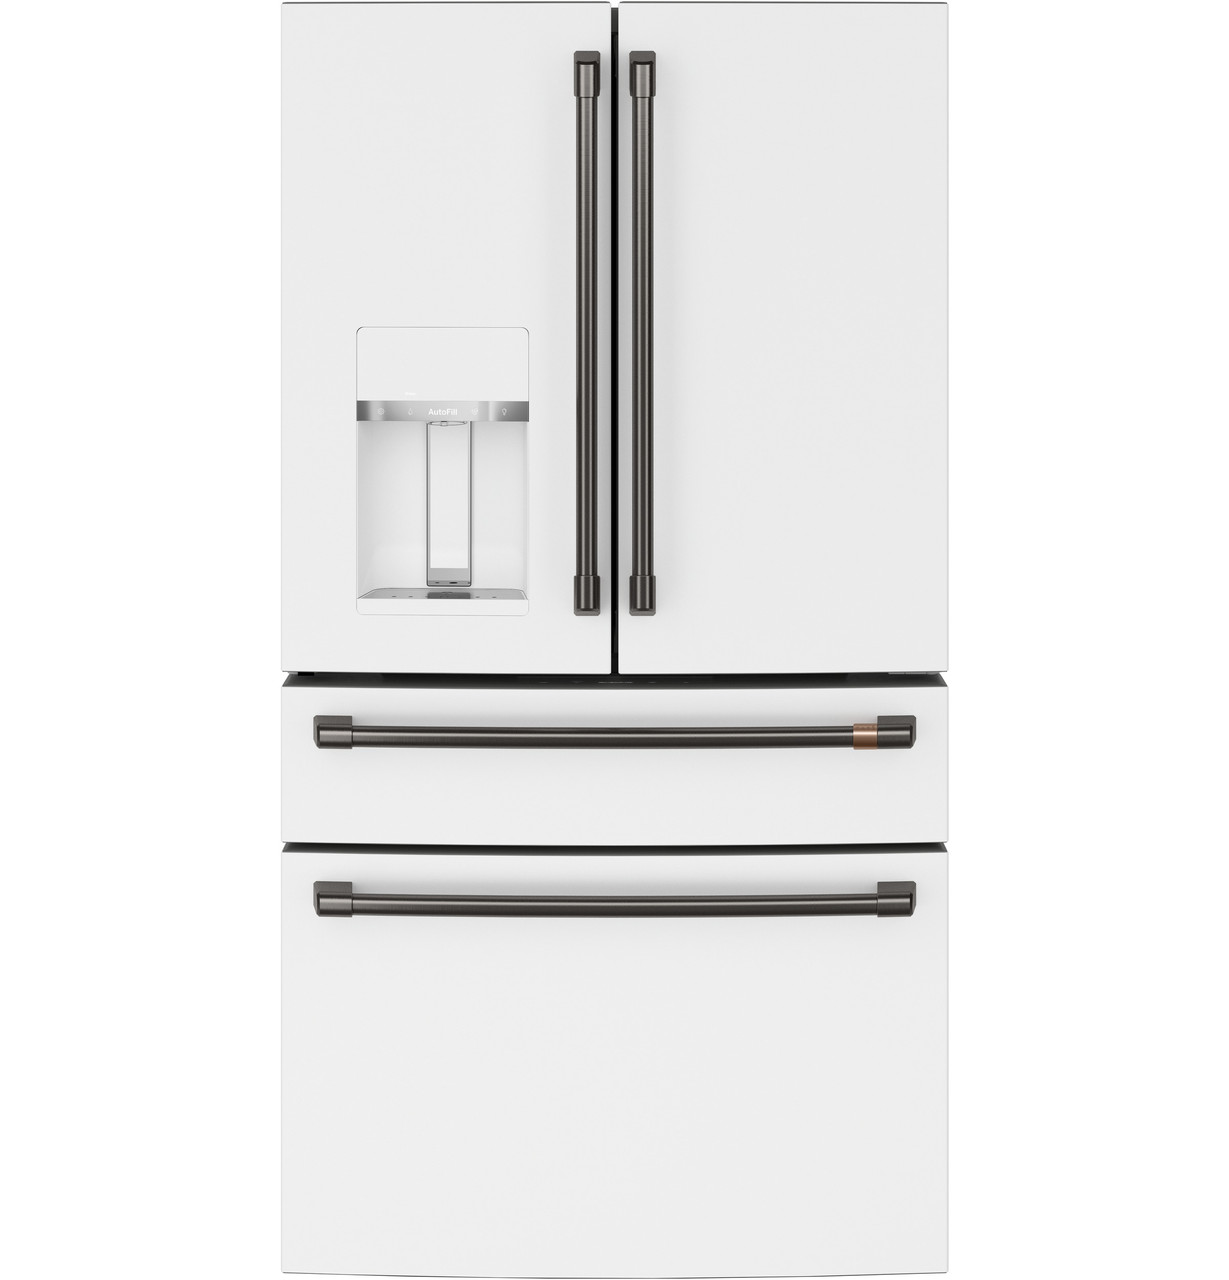 Counter Depth Refrigerator Dimensions - Size Guide, East Coast Appliance